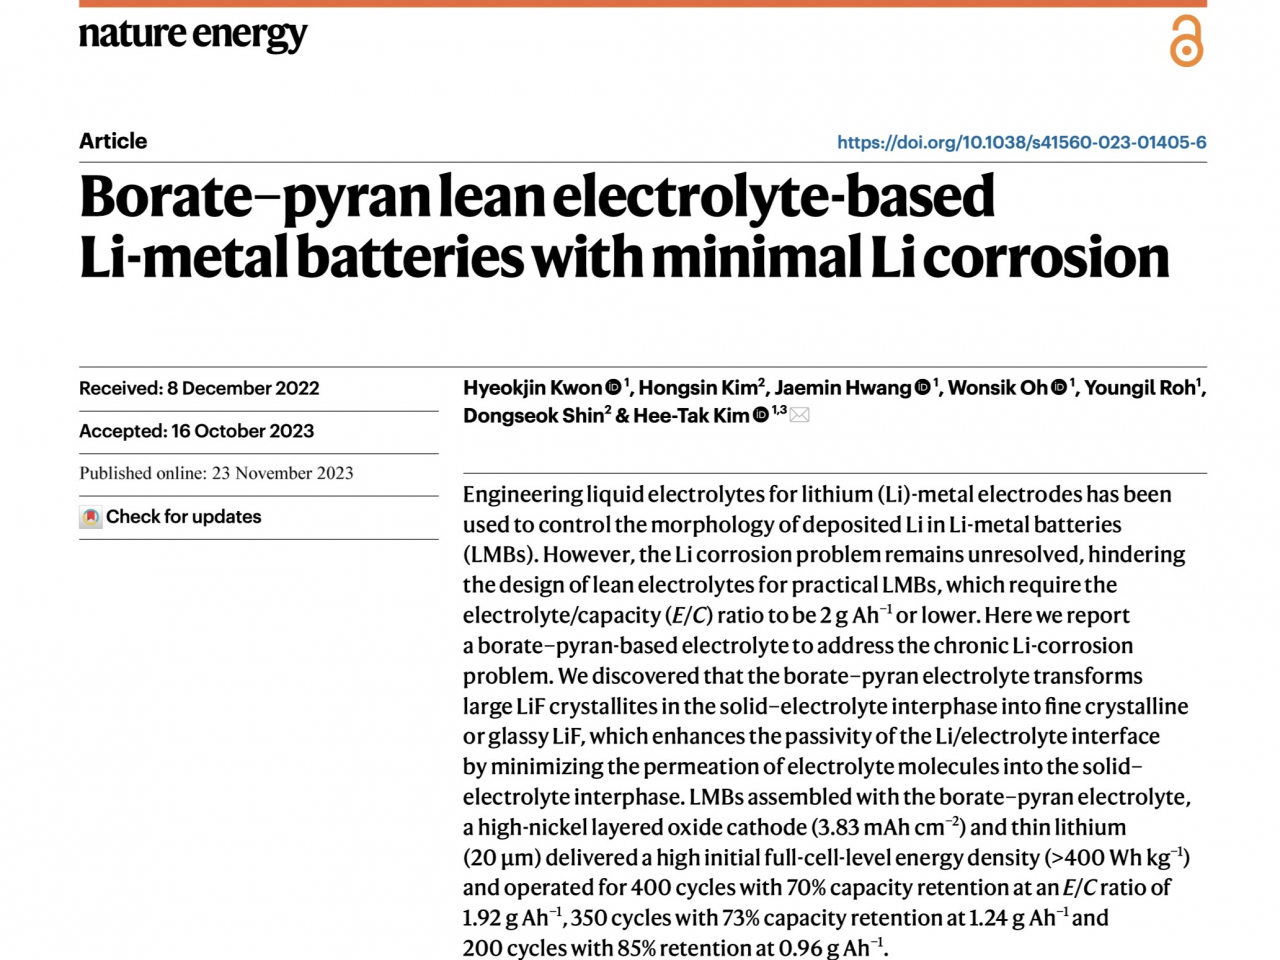 A collaborative study by LG Energy Solutions and KAIST on lithium metal battery discovery is featured on Nature Energy, a prestigious academic journal specializing in energy research. (Nature Energy)